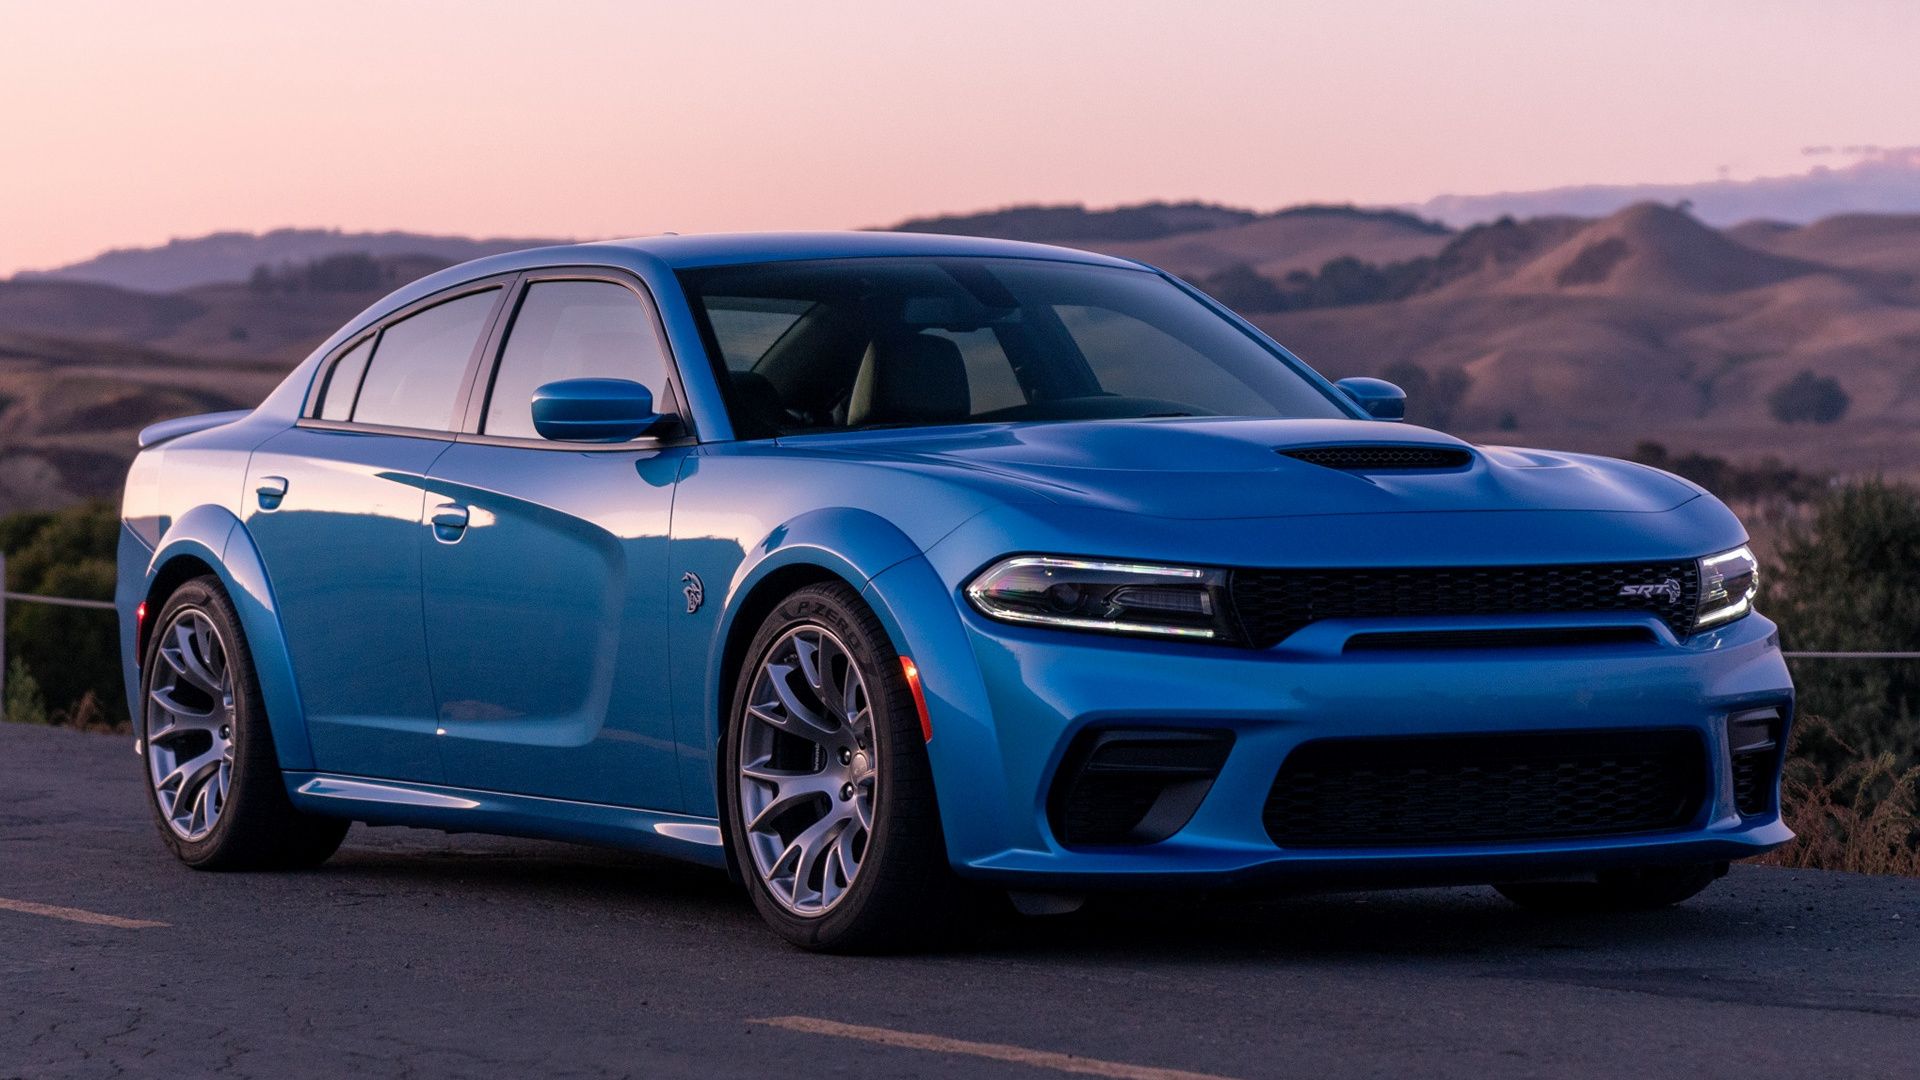 B5 Blue 2020 Dodge Charger Daytona 50th Anniversary Edition parked at the side of a road at dawn